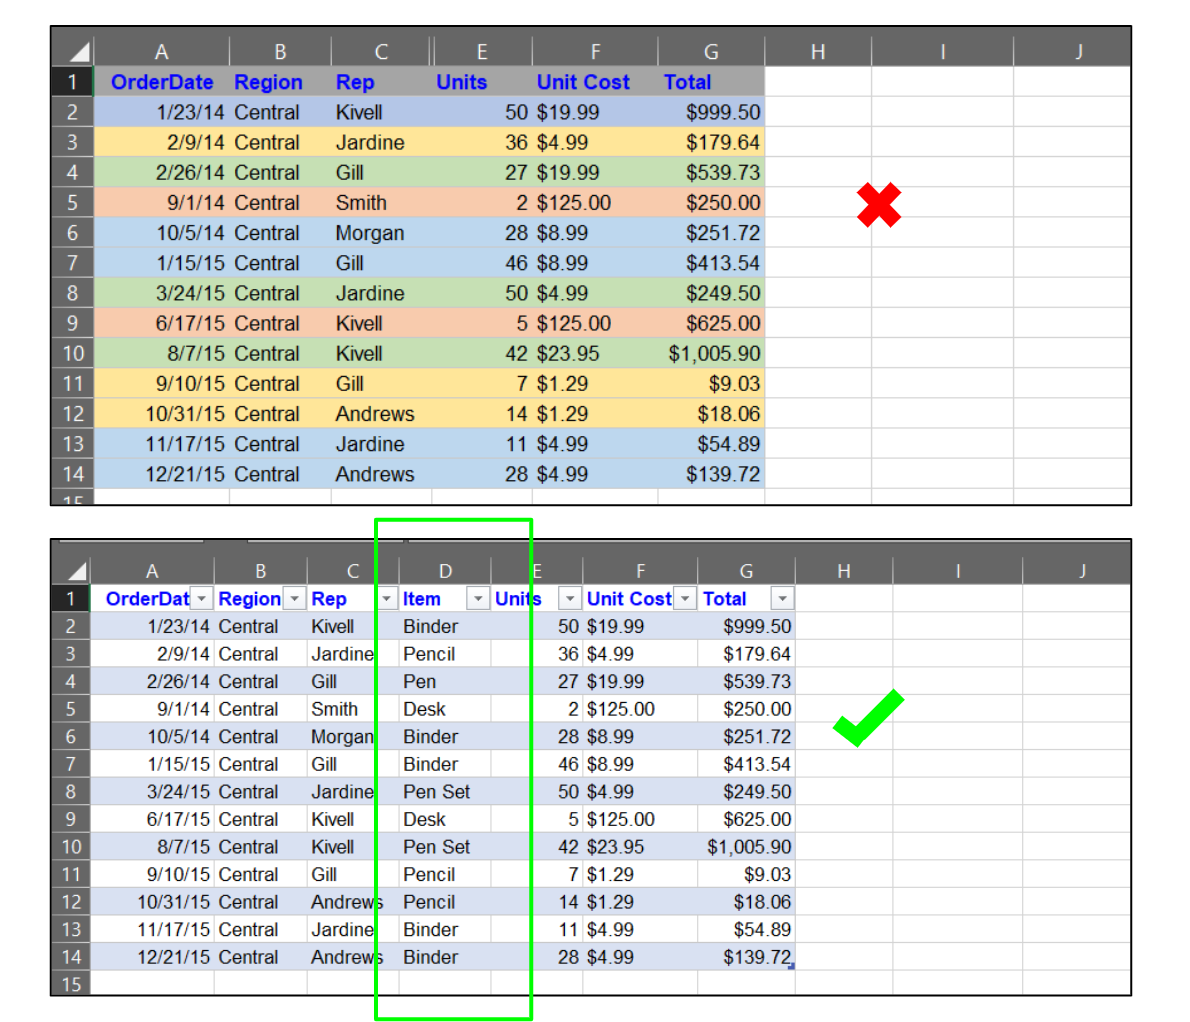 Excel screenshot - example of how to use and not use color for data categories